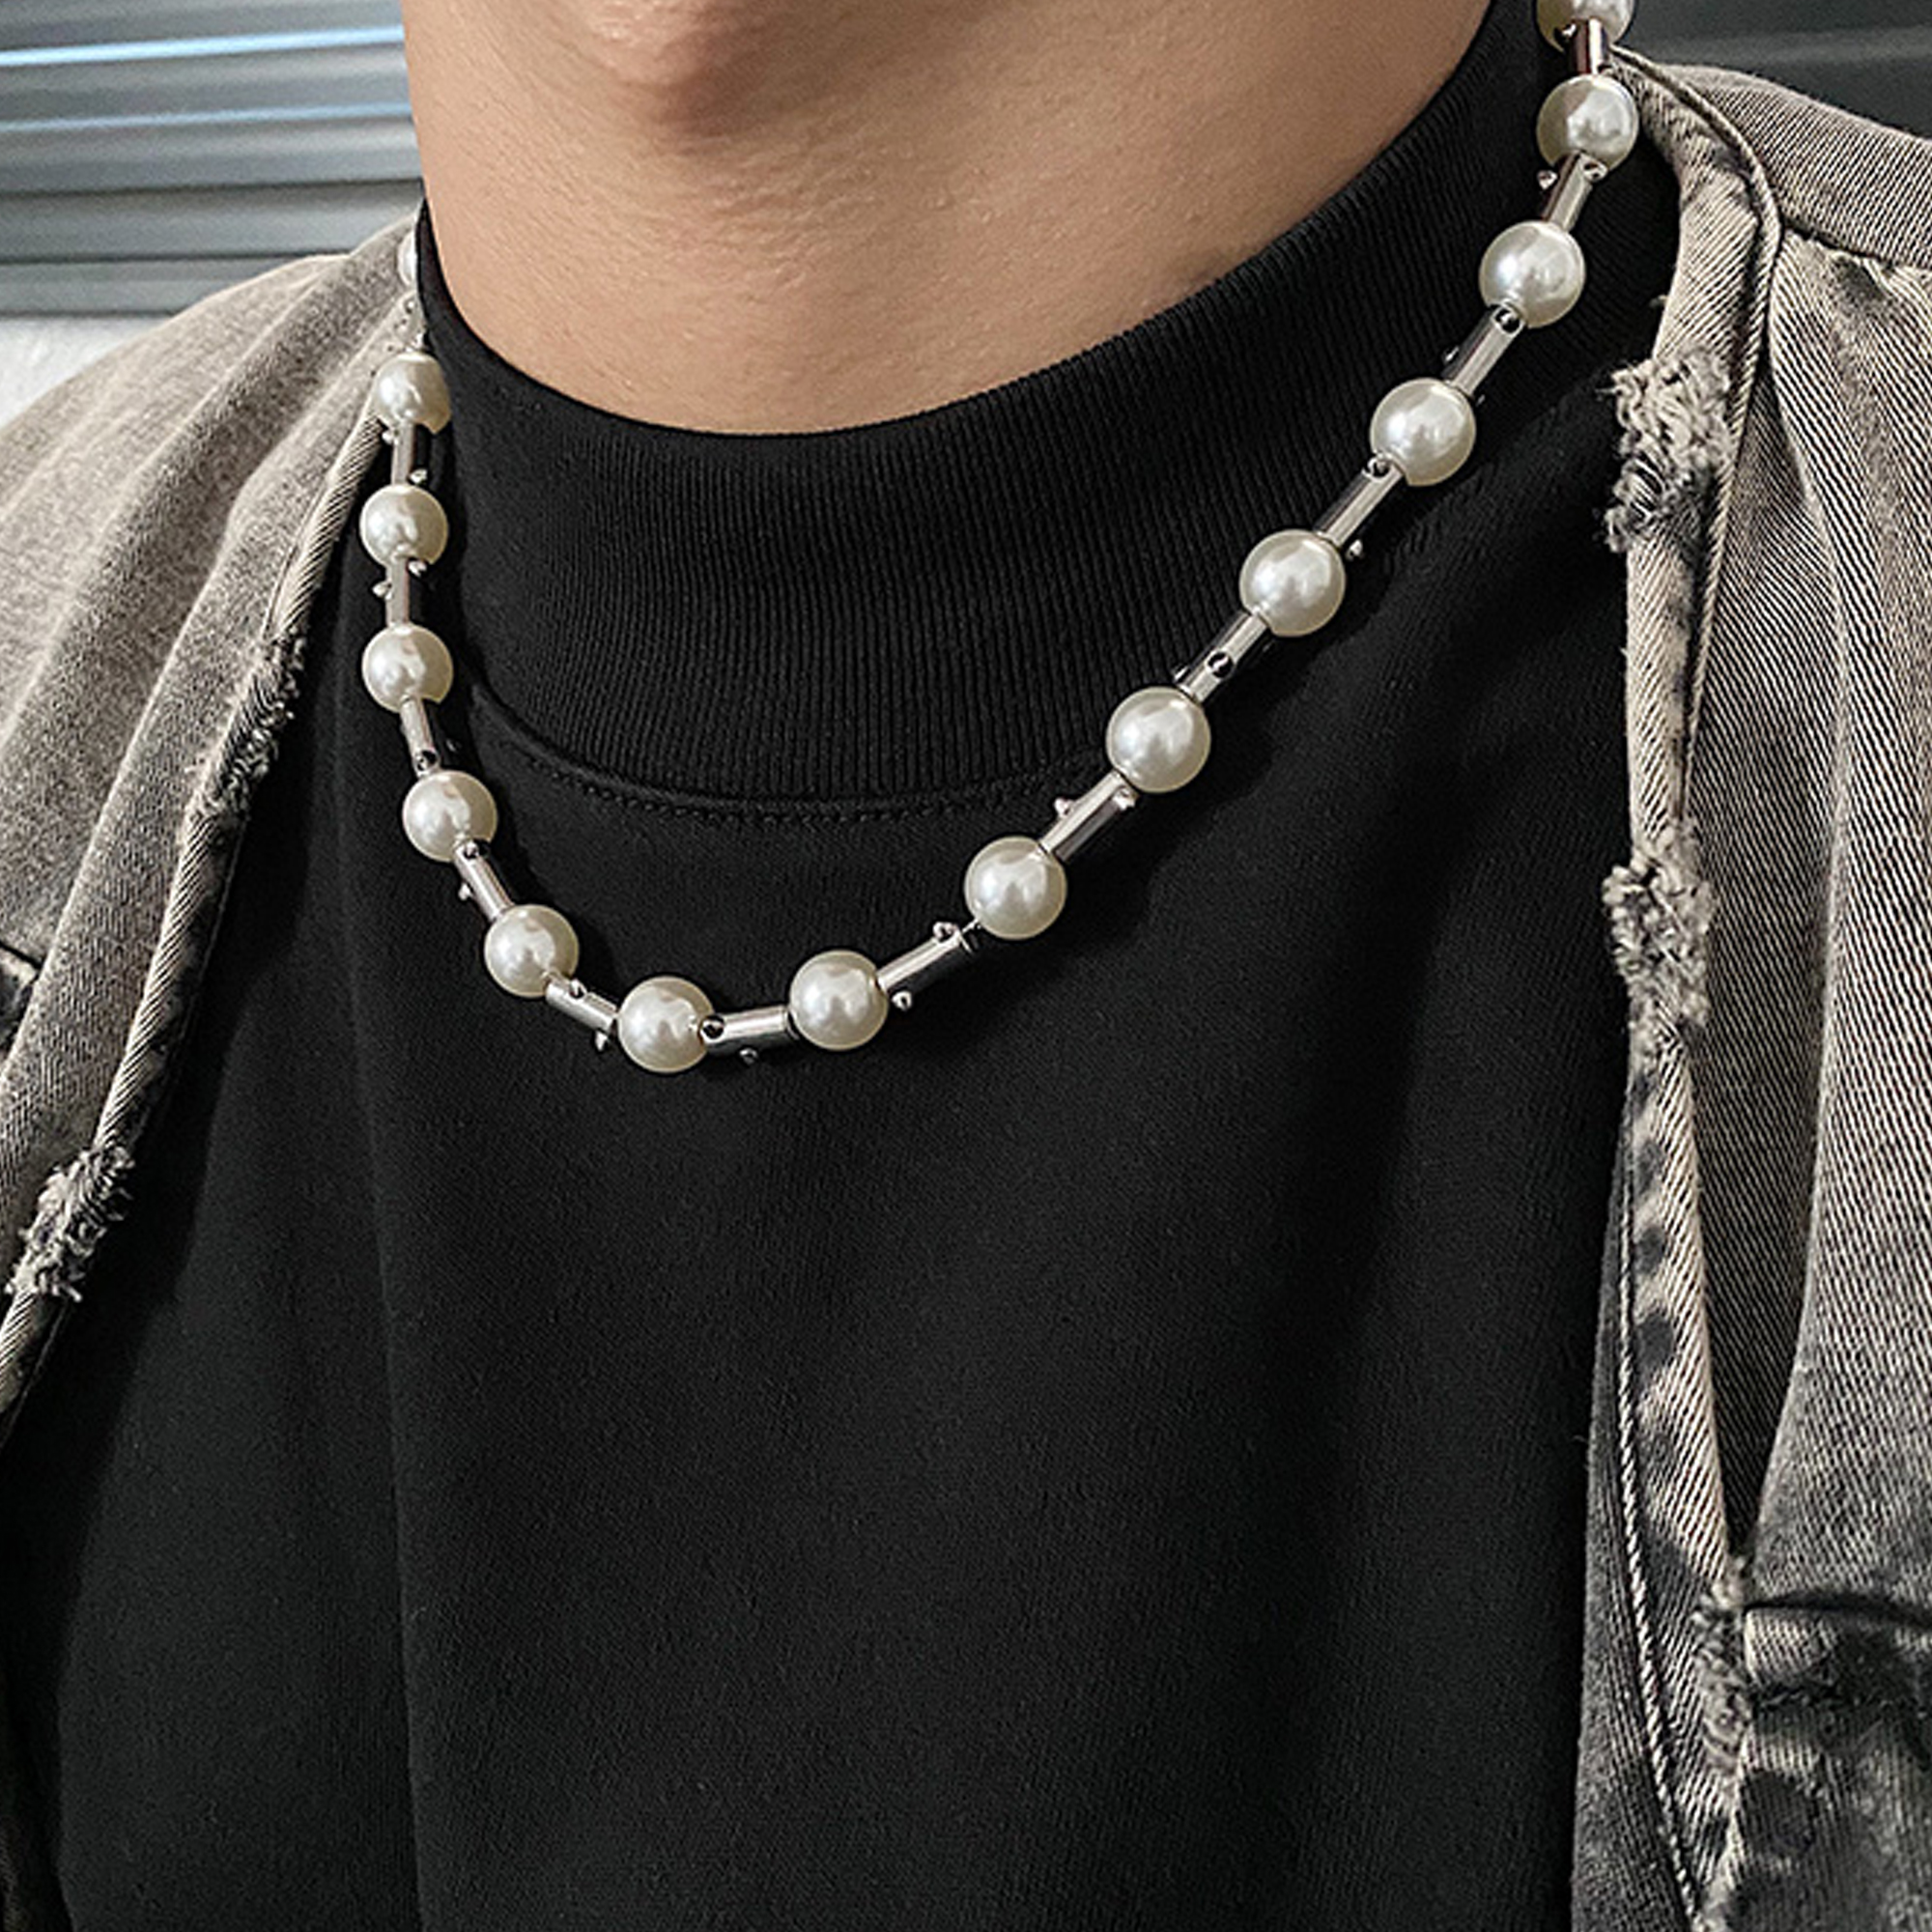 Mens Pearl Necklace, Real Pearl Choker, Crystal Beaded Y2k Necklace Men,  Surfer Necklace,boyfriend Gift Ideas, Mens Black and White Necklace - Etsy  | Men necklace, Mens pearl necklace, Surfer necklace